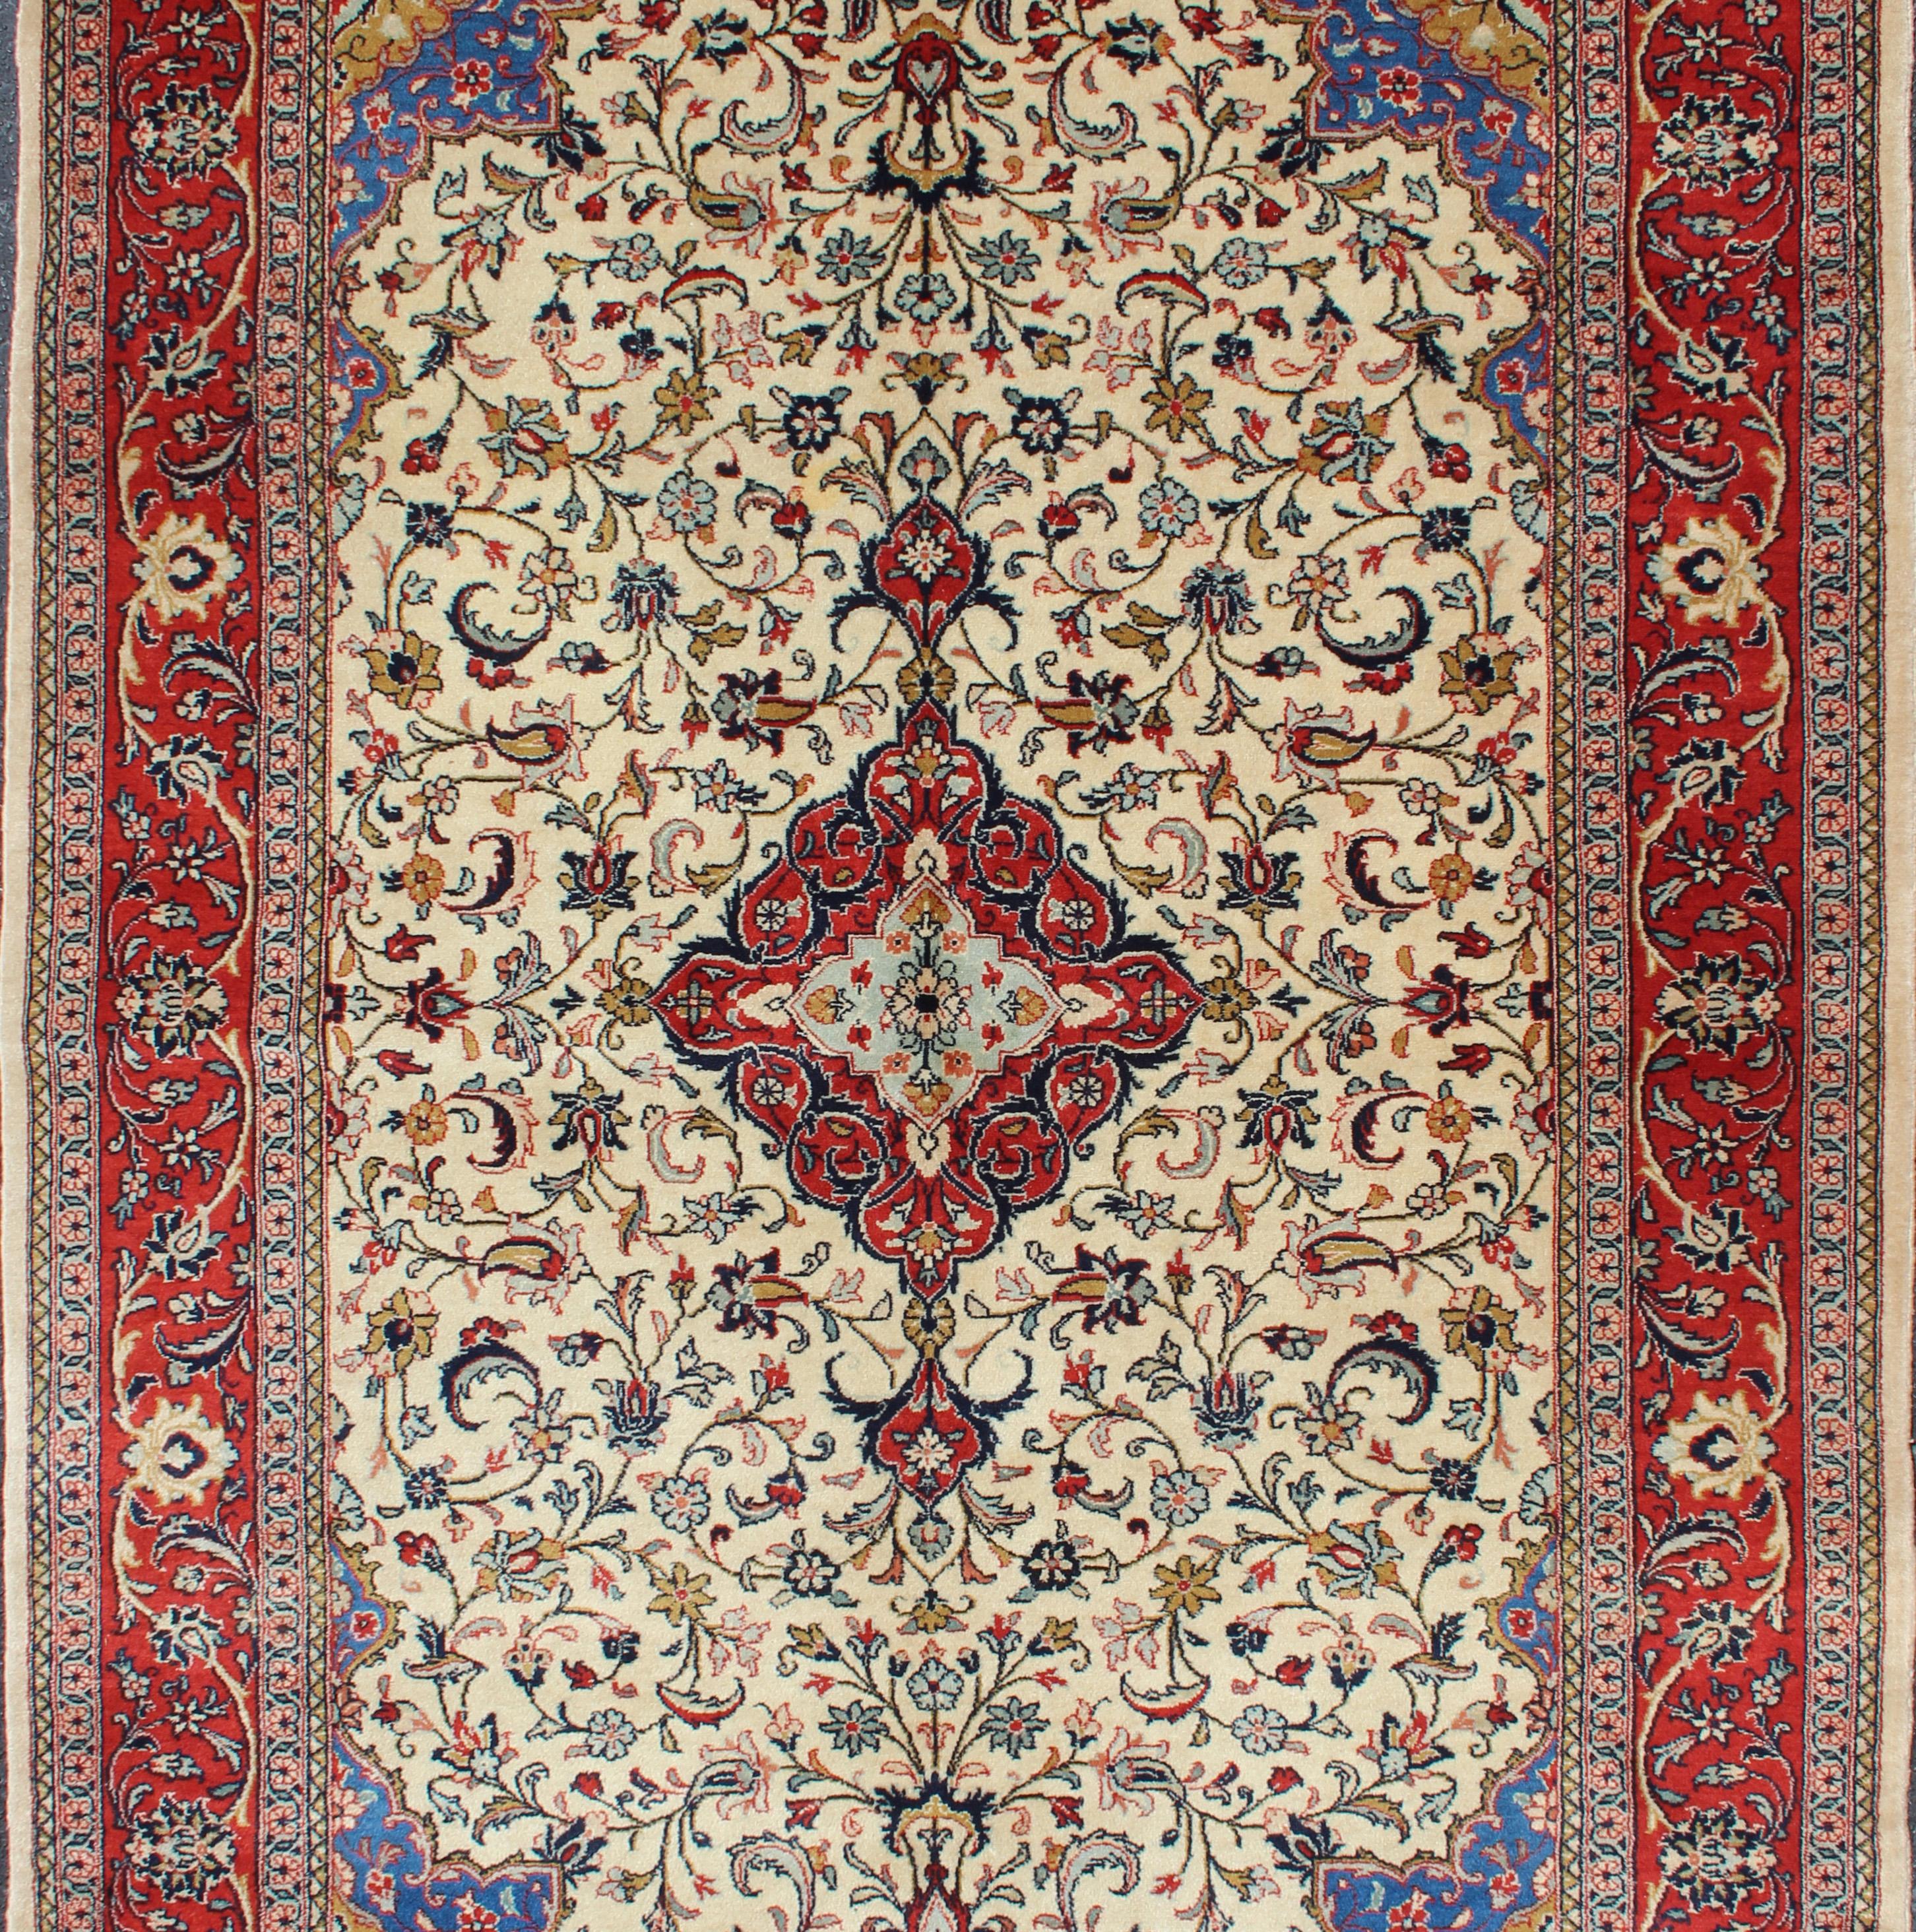 Persian Tabriz vintage rug with all-over Floral design and small medallion in cream, blue and red. Rug 10-KE-302, country of origin / type: Iran / Sarouk, circa 1950s.
This finely woven mid-20th century Tabriz rug represents one of the best in the